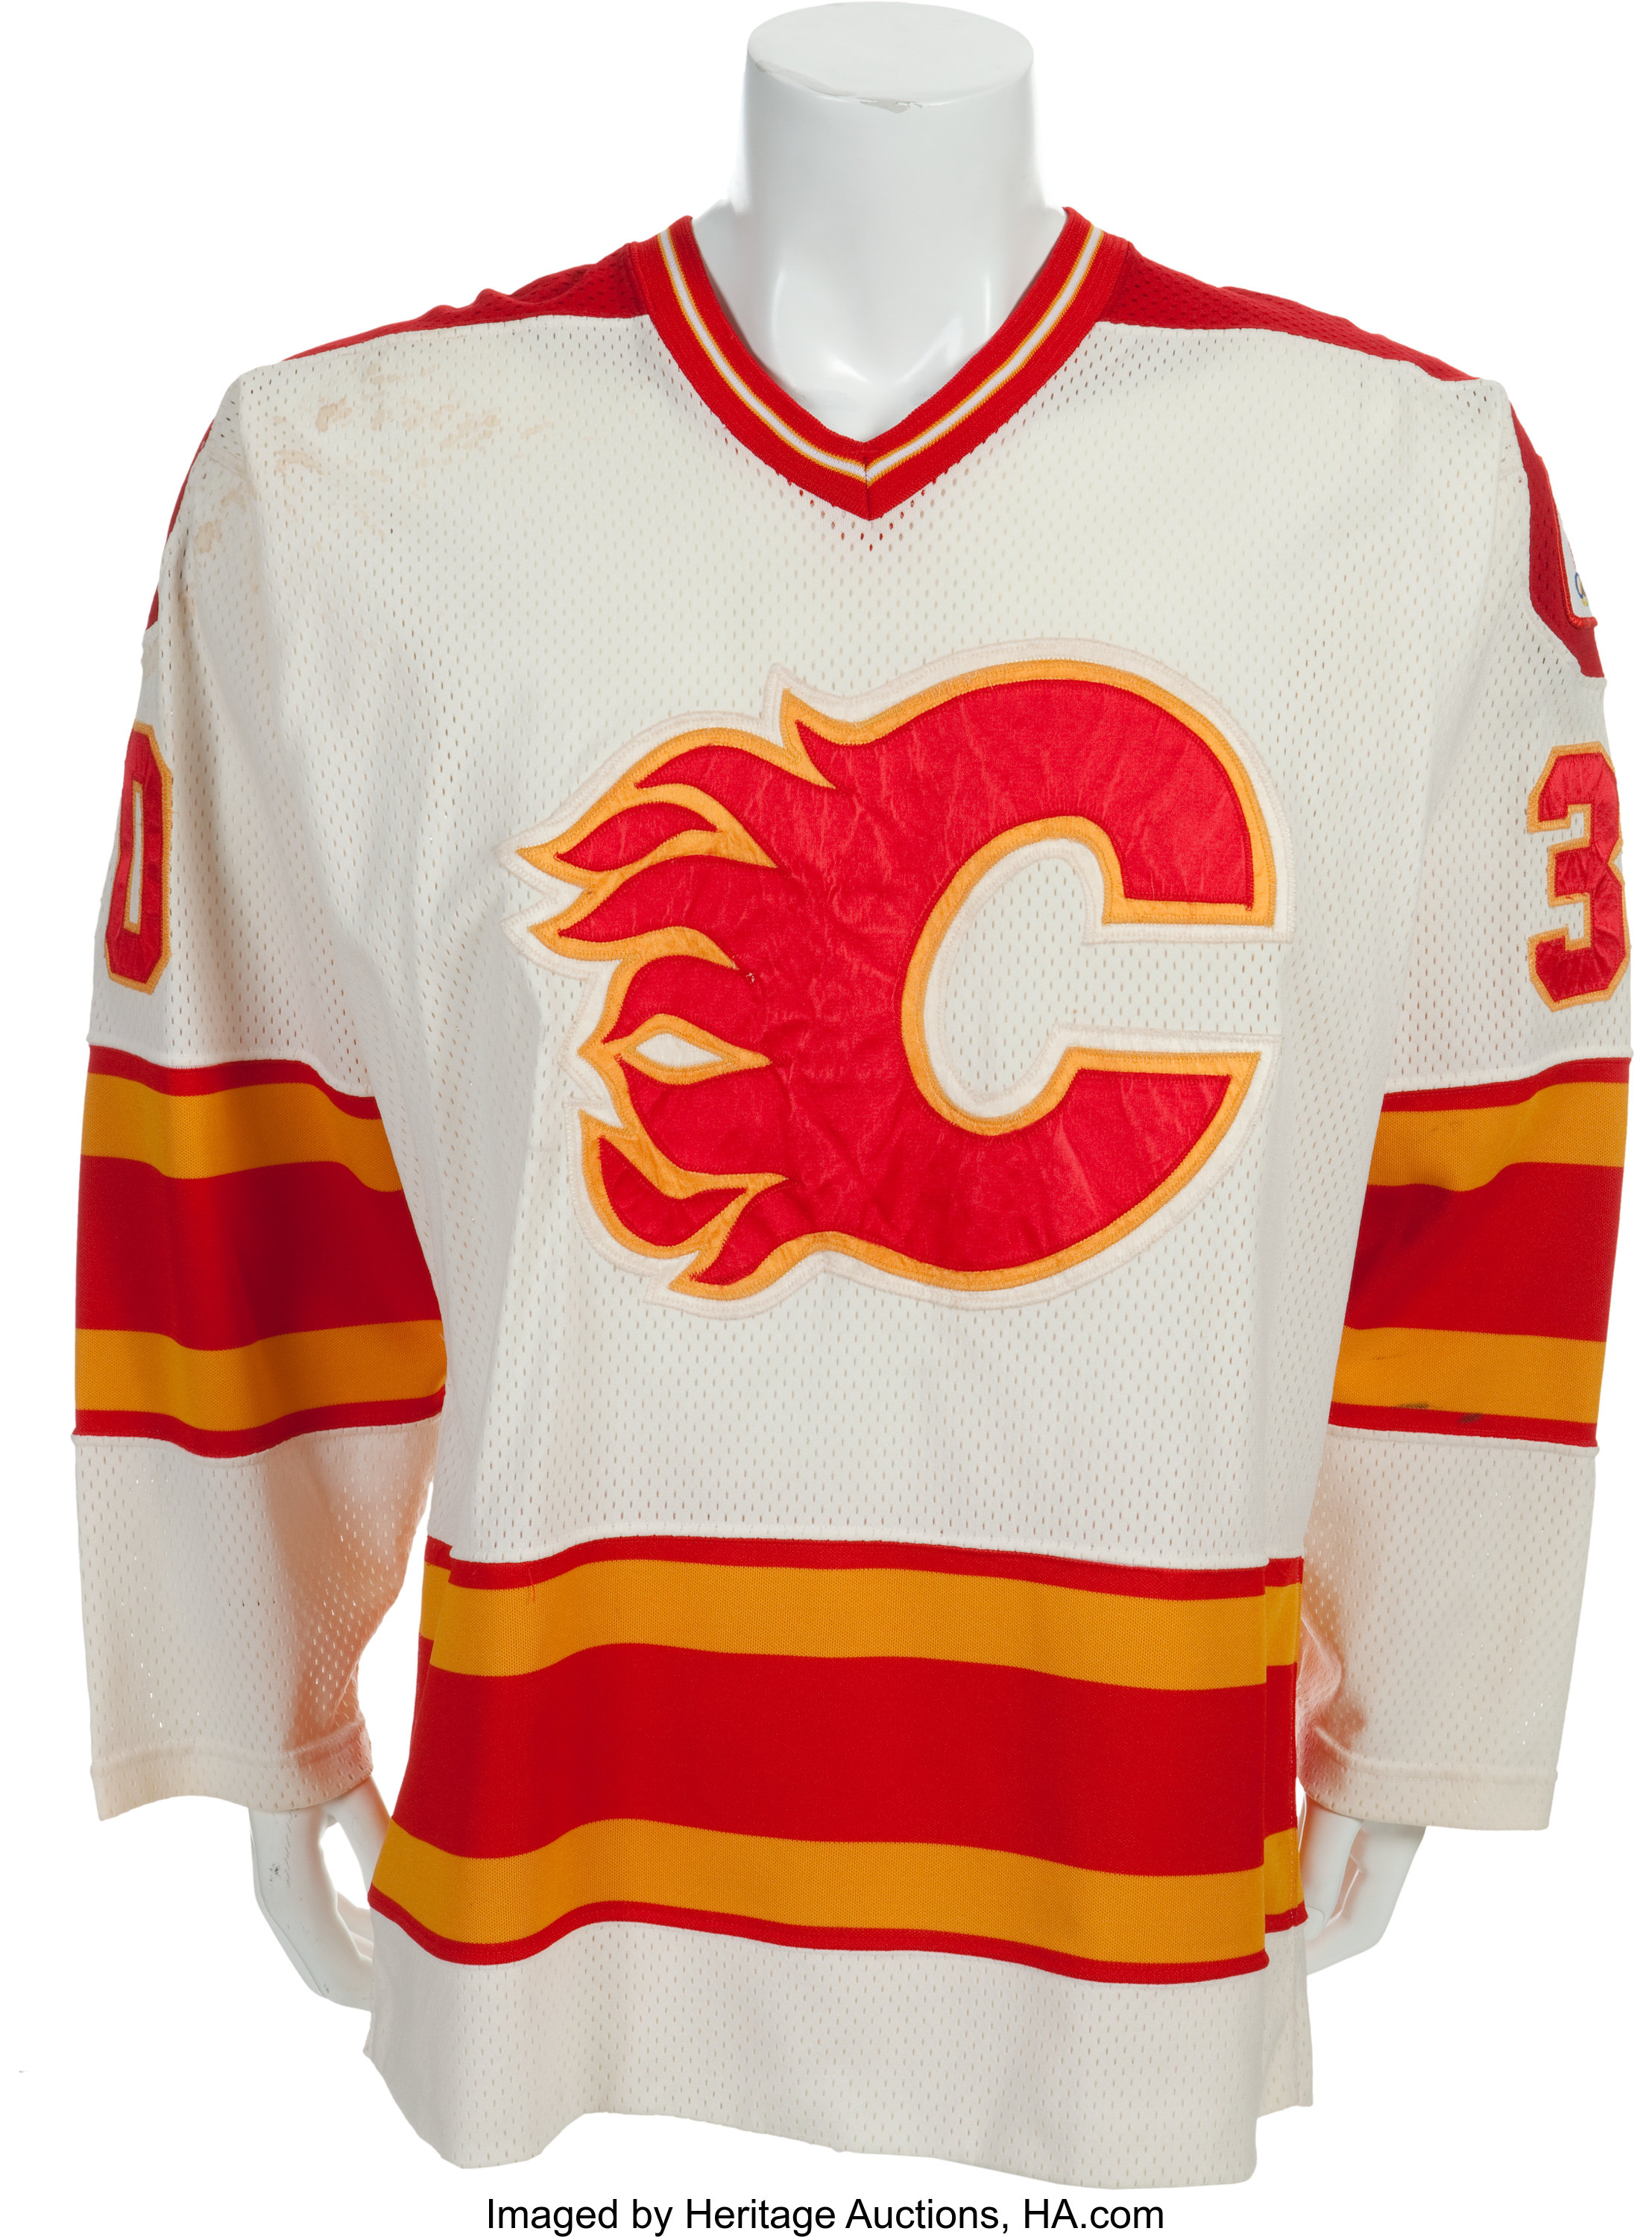 Calgary Flames Game Used NHL Jerseys for sale